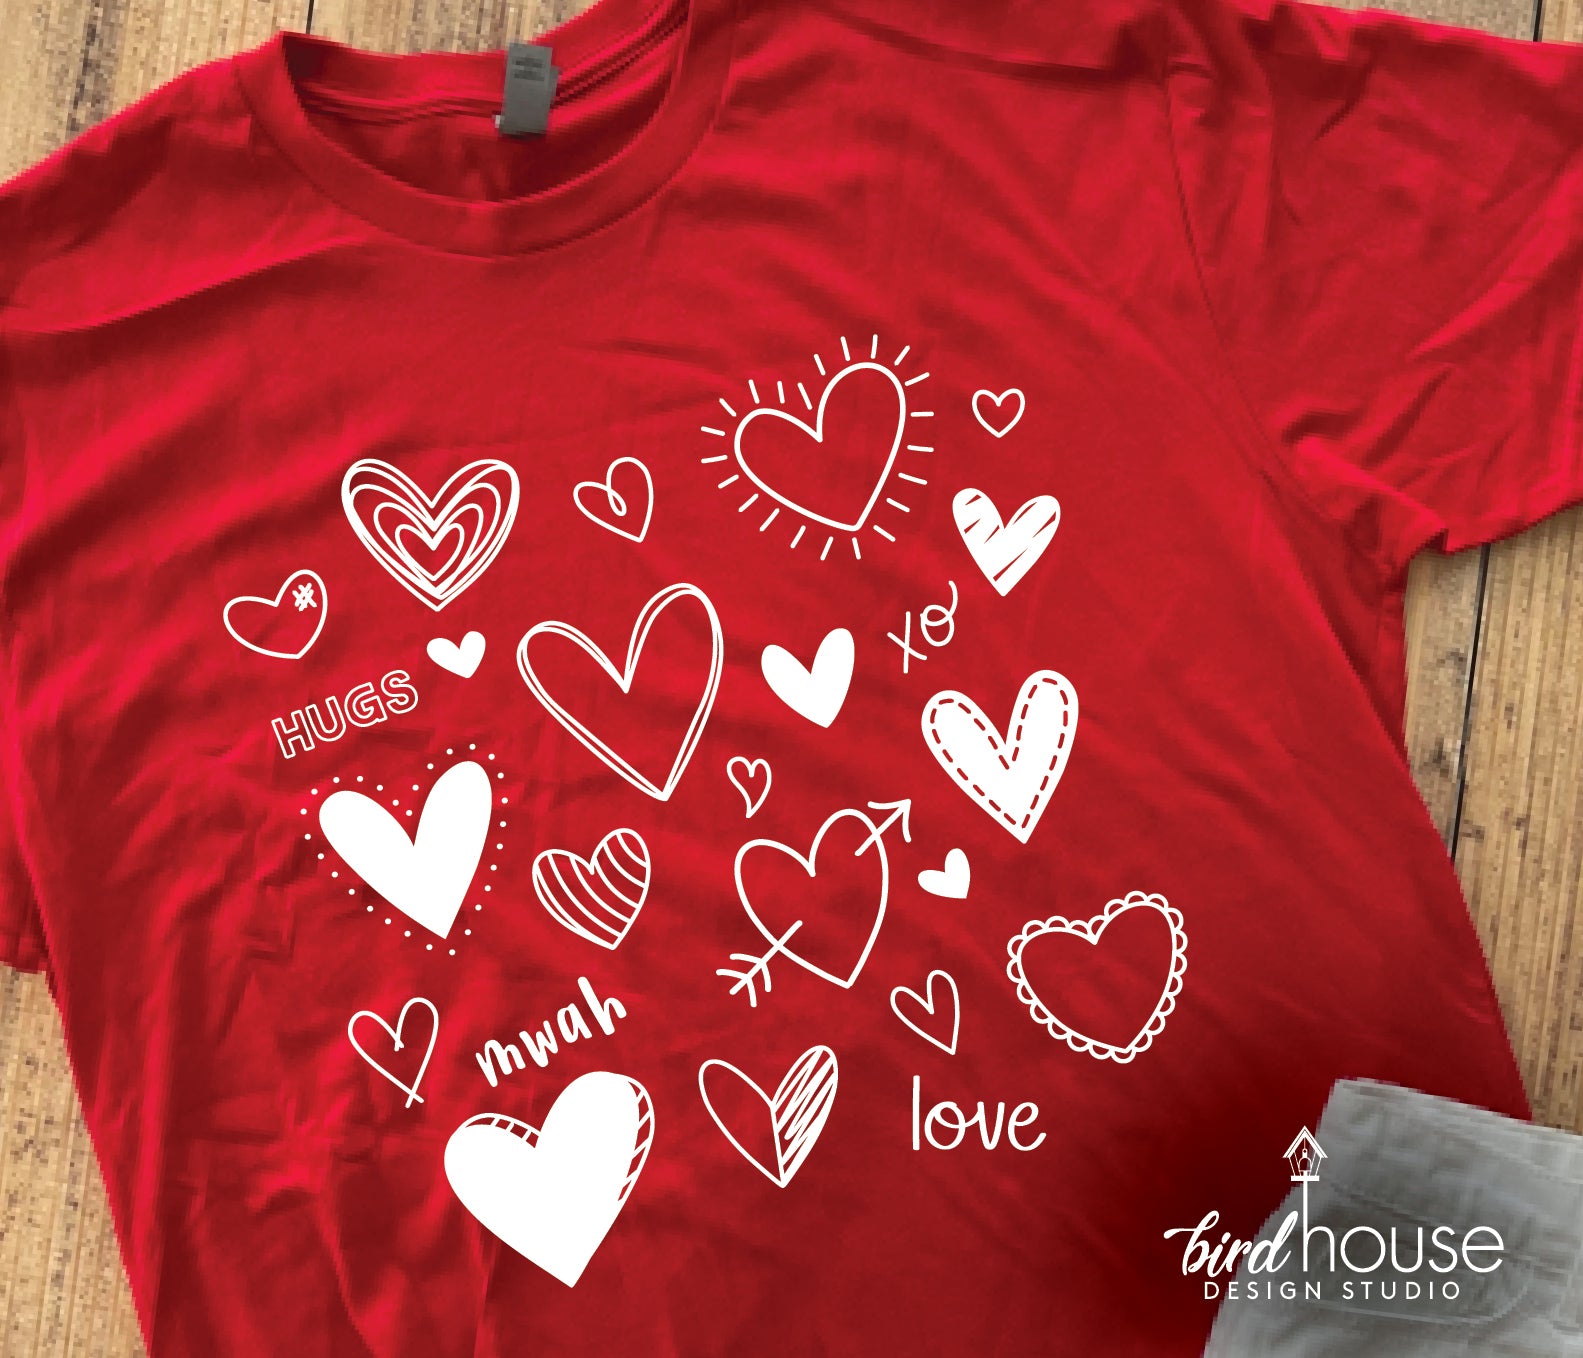 Design Haus Gallery Heart Filled with Love Graphic T-Shirt, Valentine's Day Gift, Modern Heart Design, Happy Valentine's Day Shirt, Red Valentine's Day Shirt M